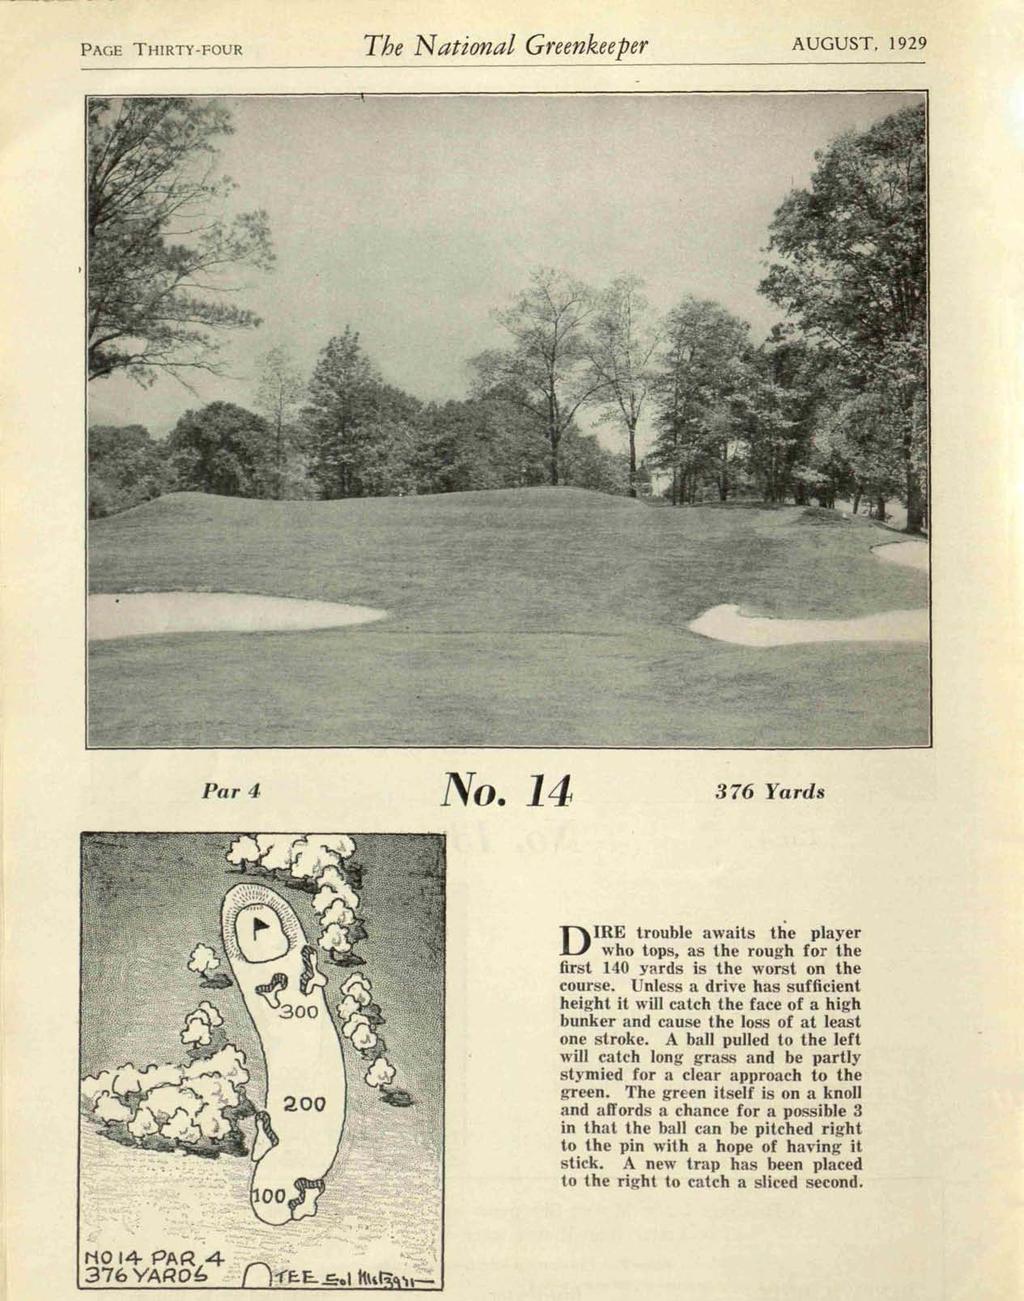 PAGE THIRTY-FOUR The National Greenkeeper AUGUST, 1929 Par 4 No. 14 376 Yards DIRE trouble awaits the player who tops, as the rough for the first 140 yards is the worst on the course.